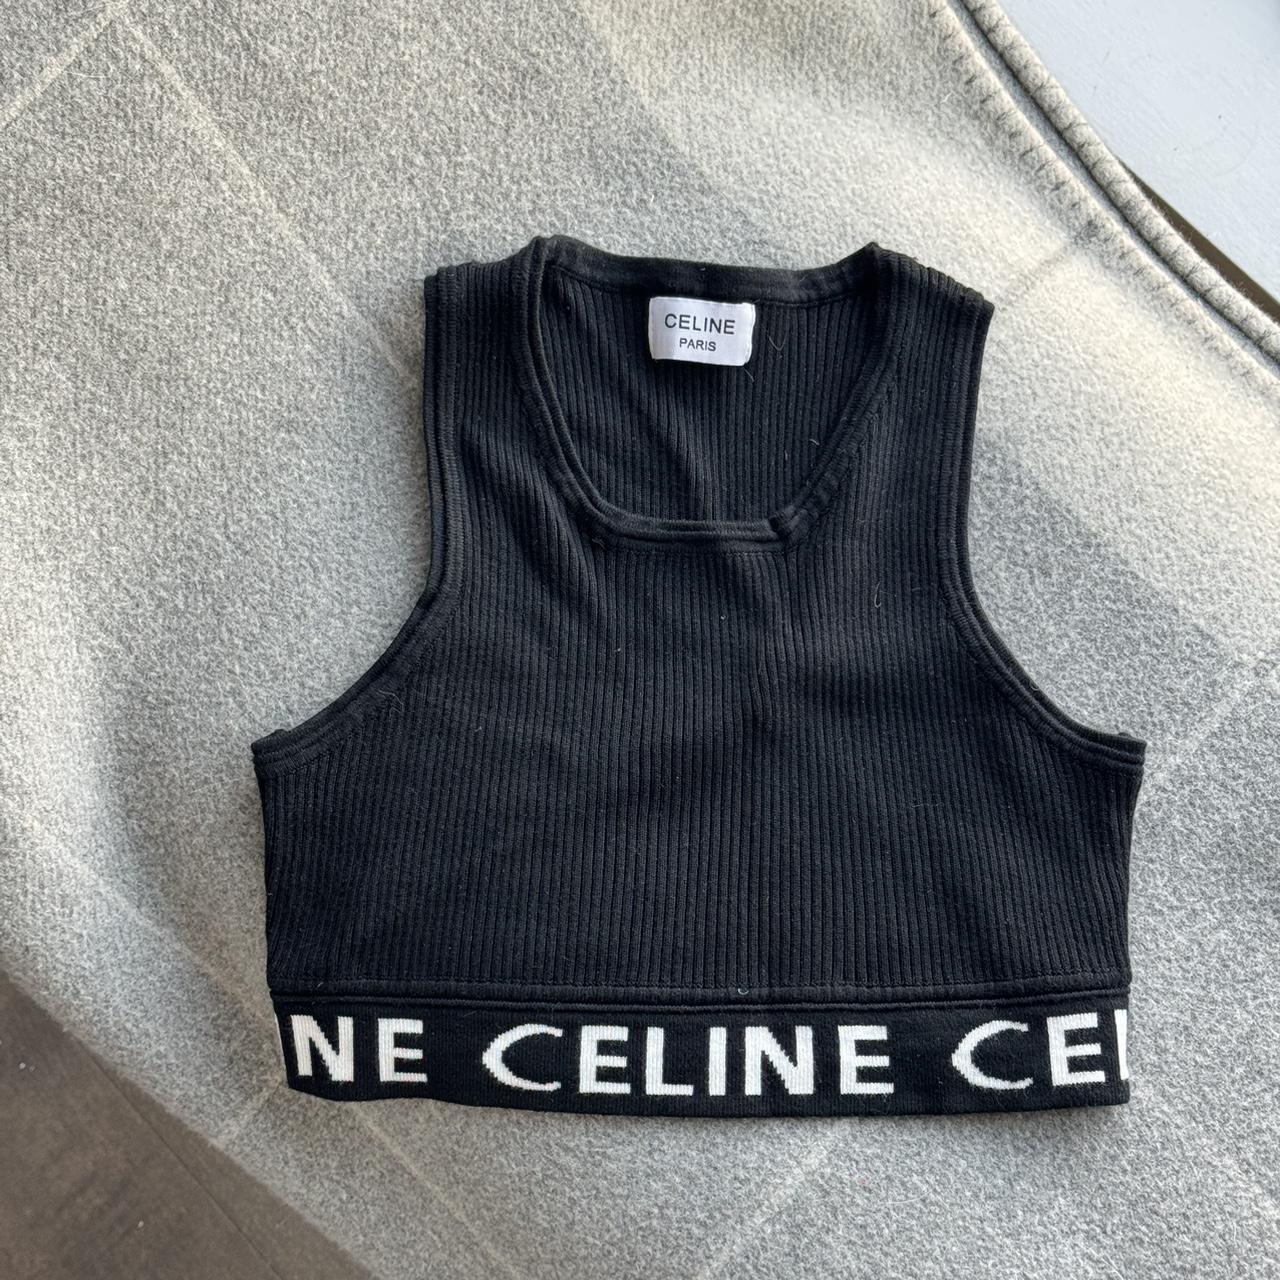 Women's Celine Tops, Preowned & Secondhand